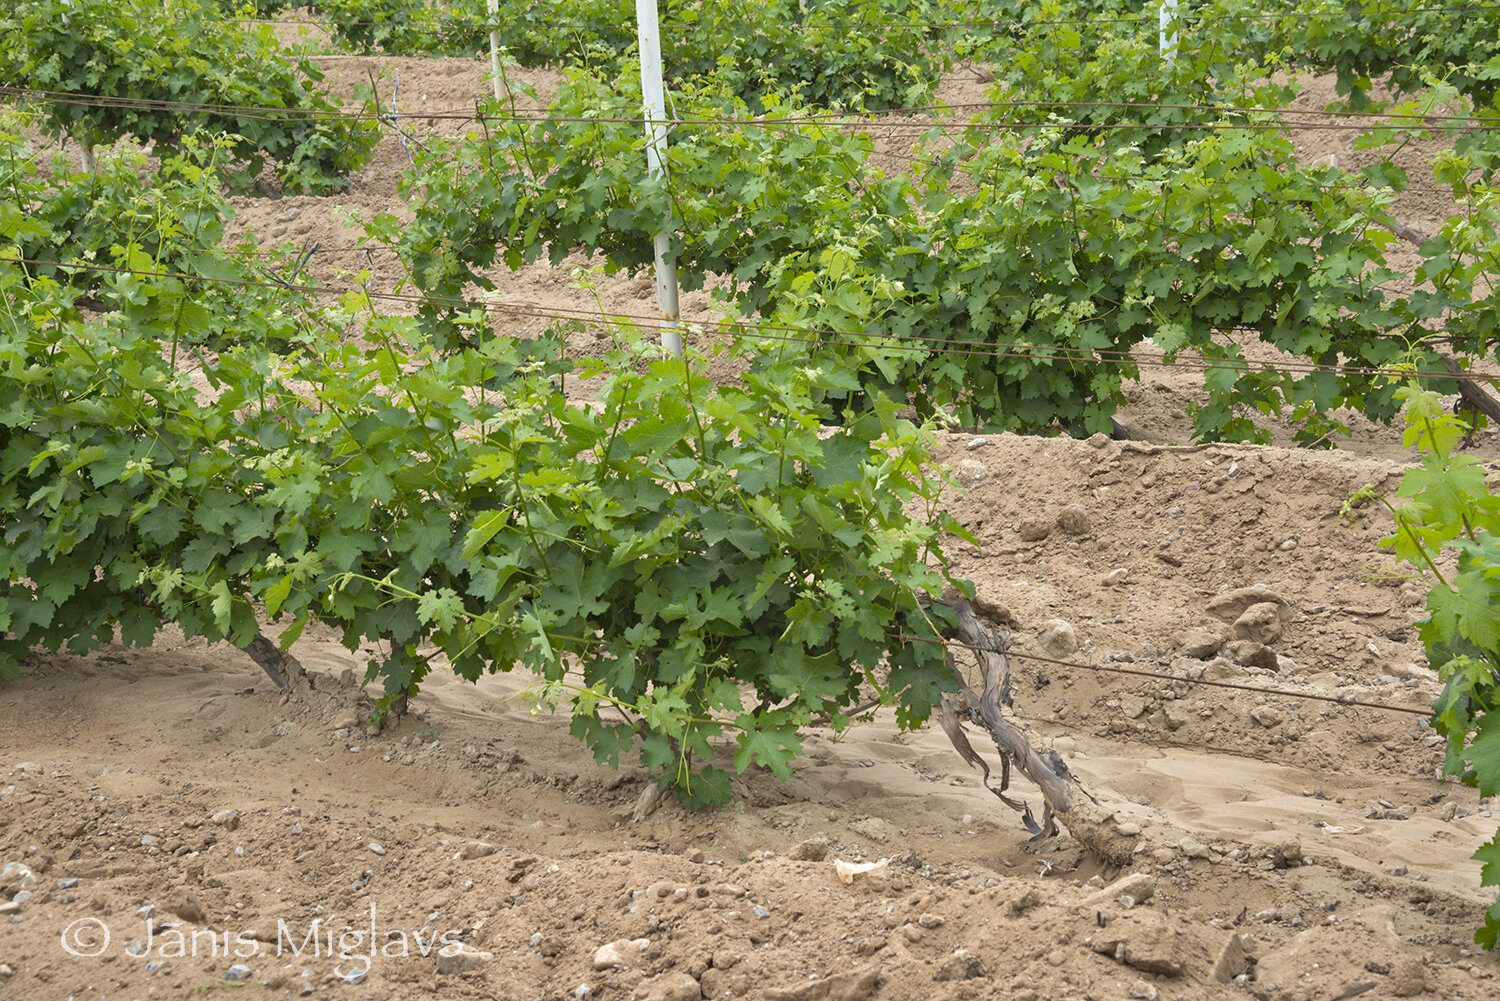 These Cabernet sauvignon vines growing in riverbed soil are buried each winter to prevent them from freezing.